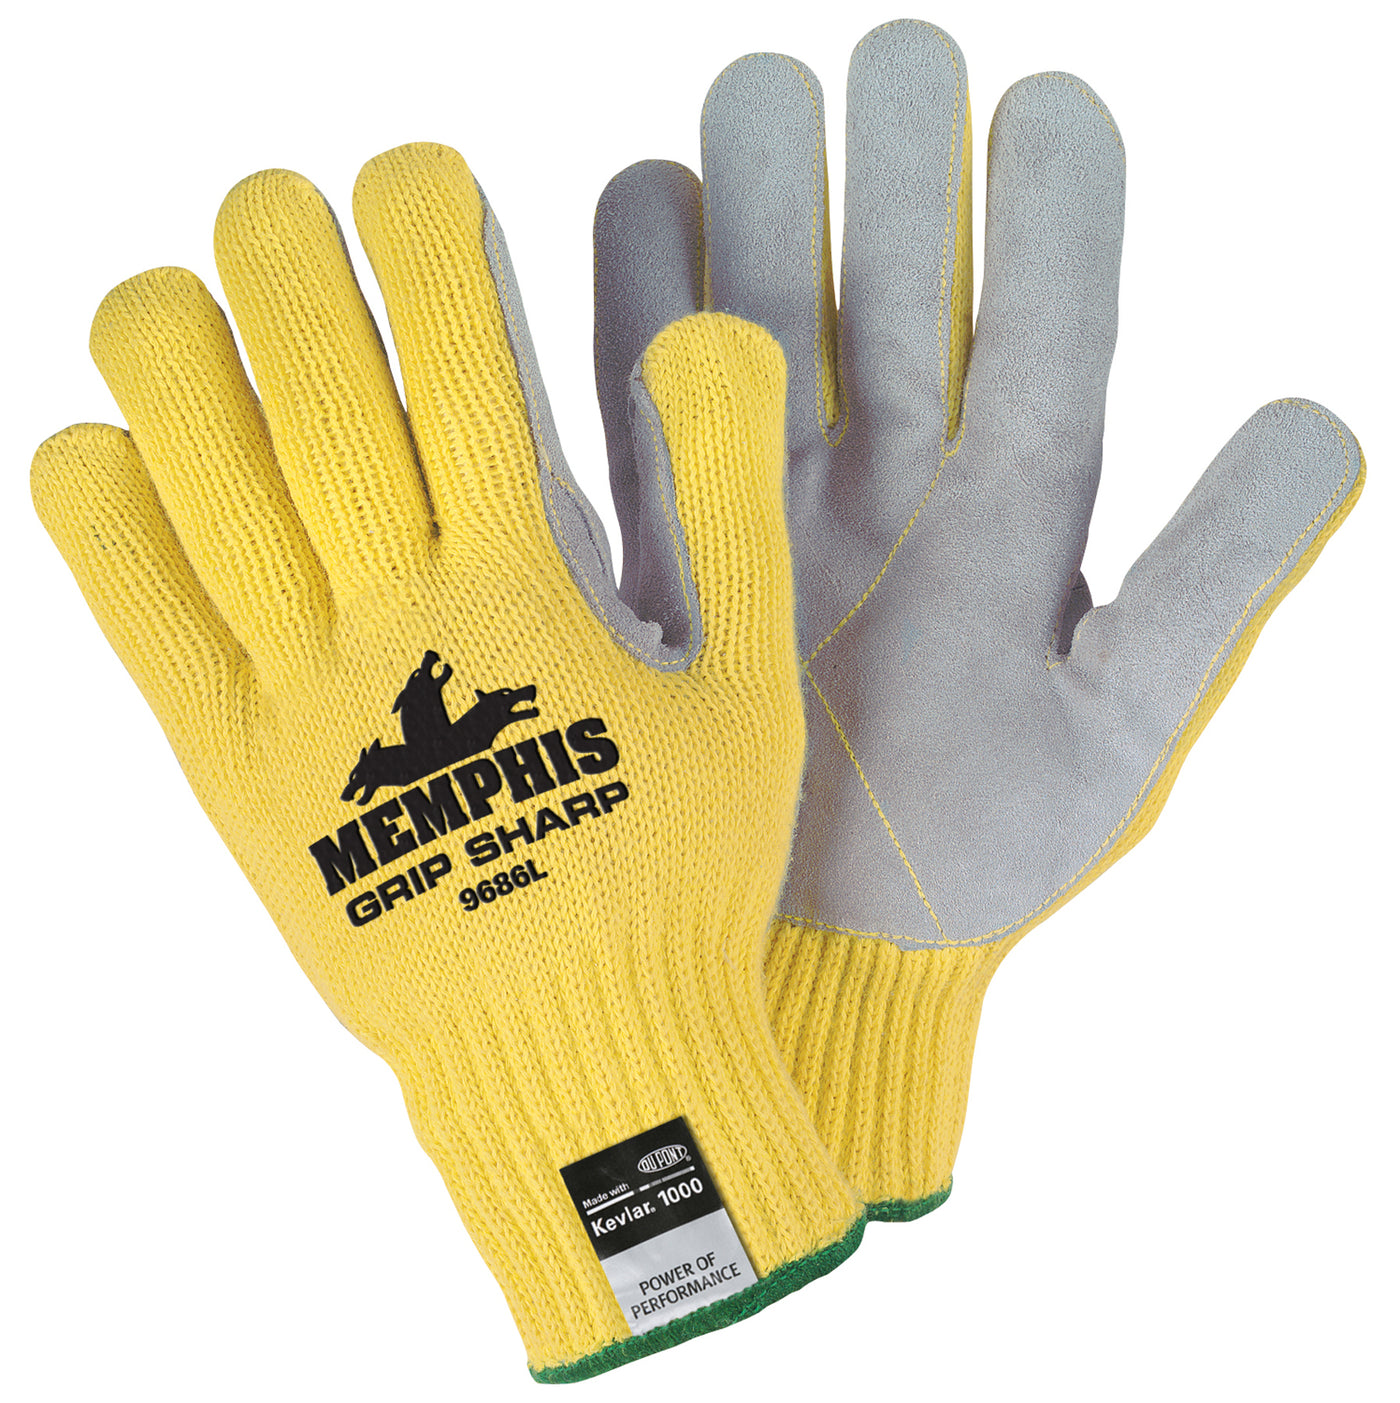 MCR Safety (6830) Rubber Coated Work Gloves, Textured, Size Large